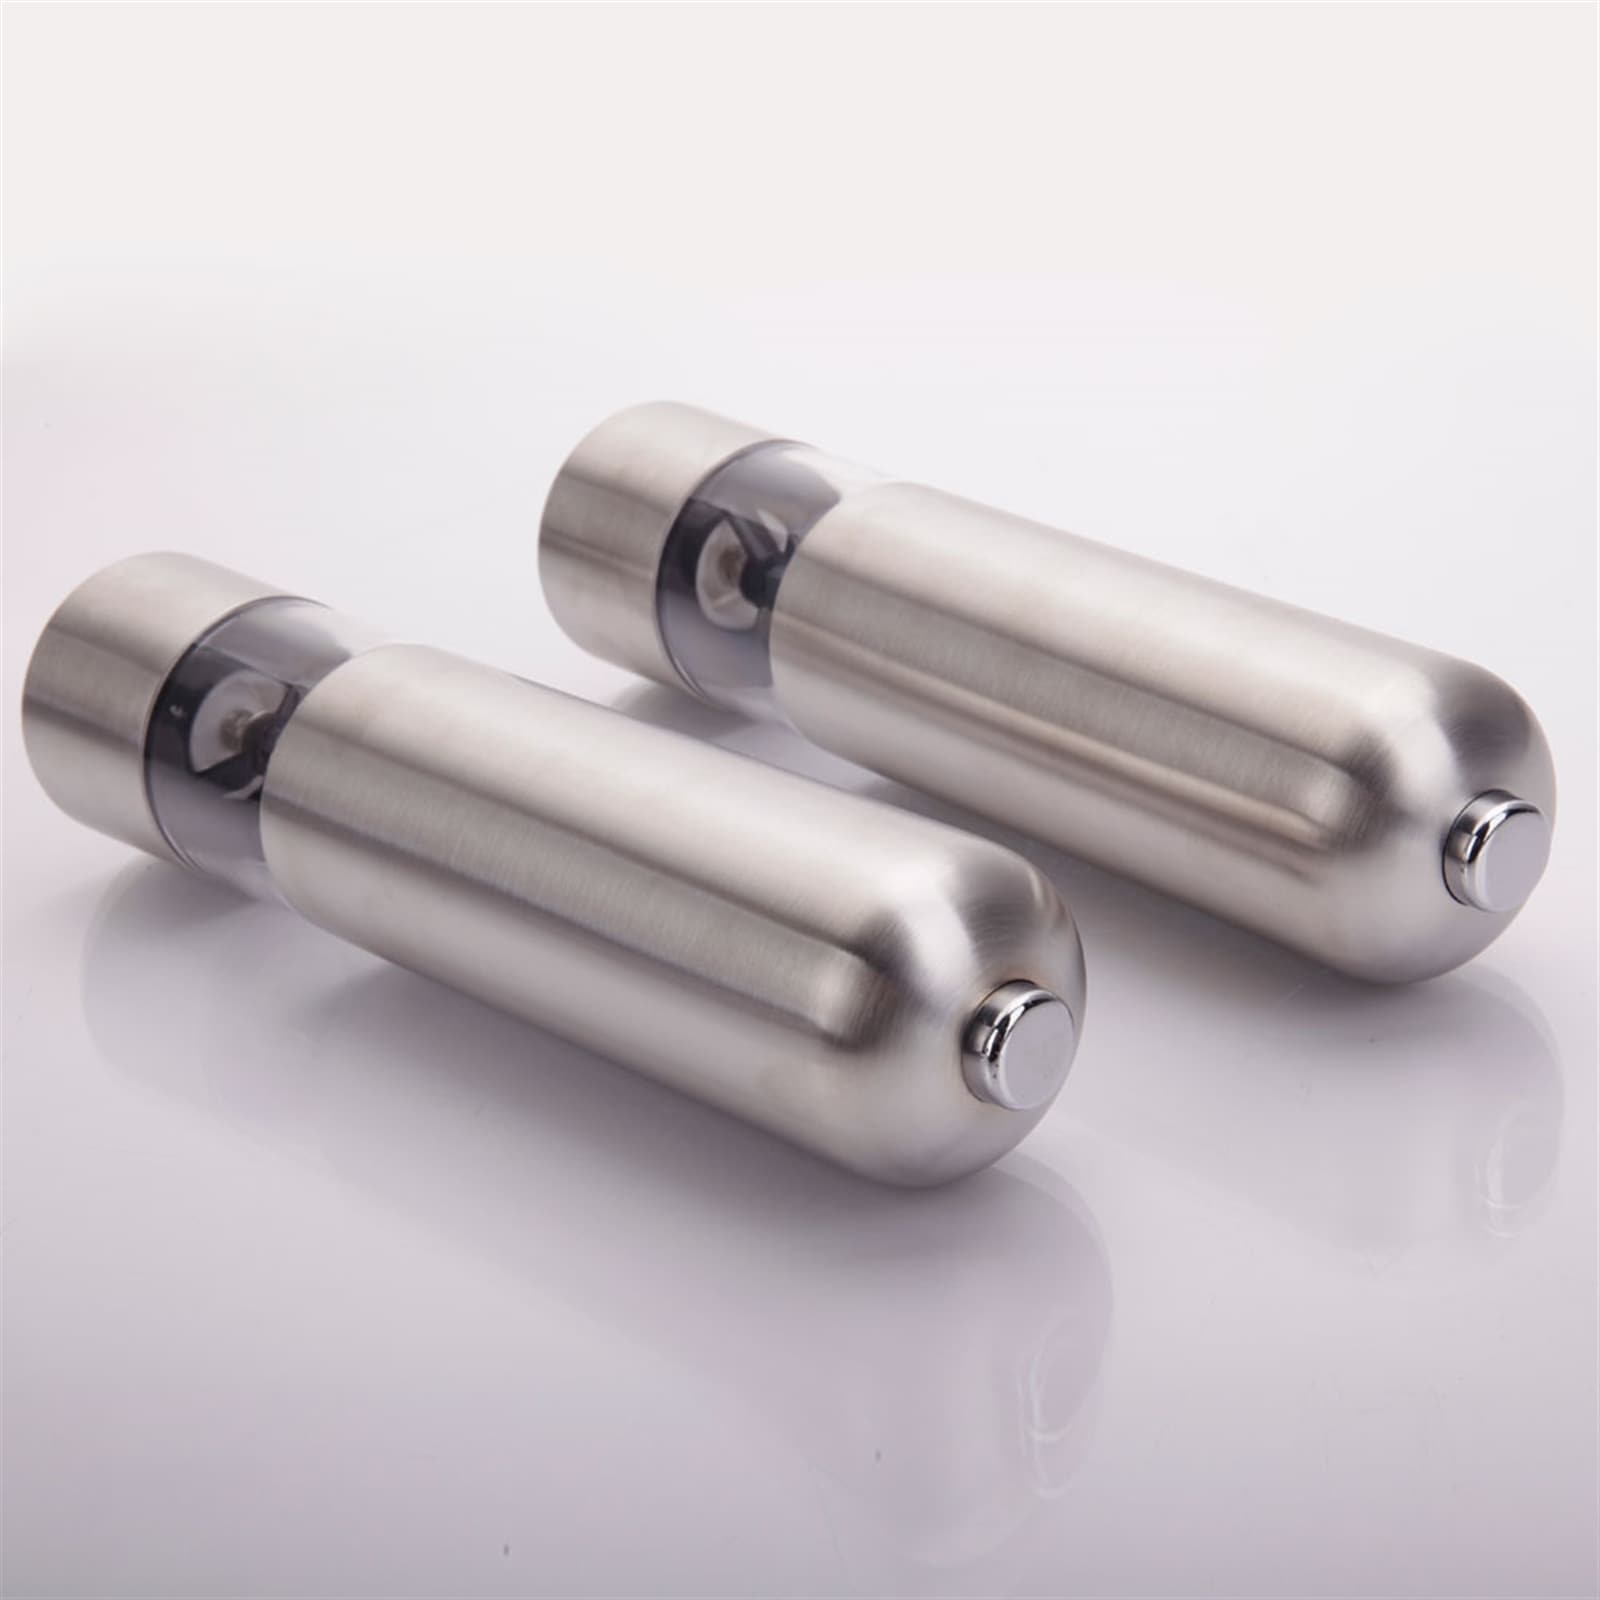 https://ak1.ostkcdn.com/images/products/is/images/direct/7860c4e5ce8a89a10d8d857f0cd8ae42a310e499/High-grade-Stainless-Steel-Electric-Automatic-Pepper-Mills-Salt-Grinder.jpg